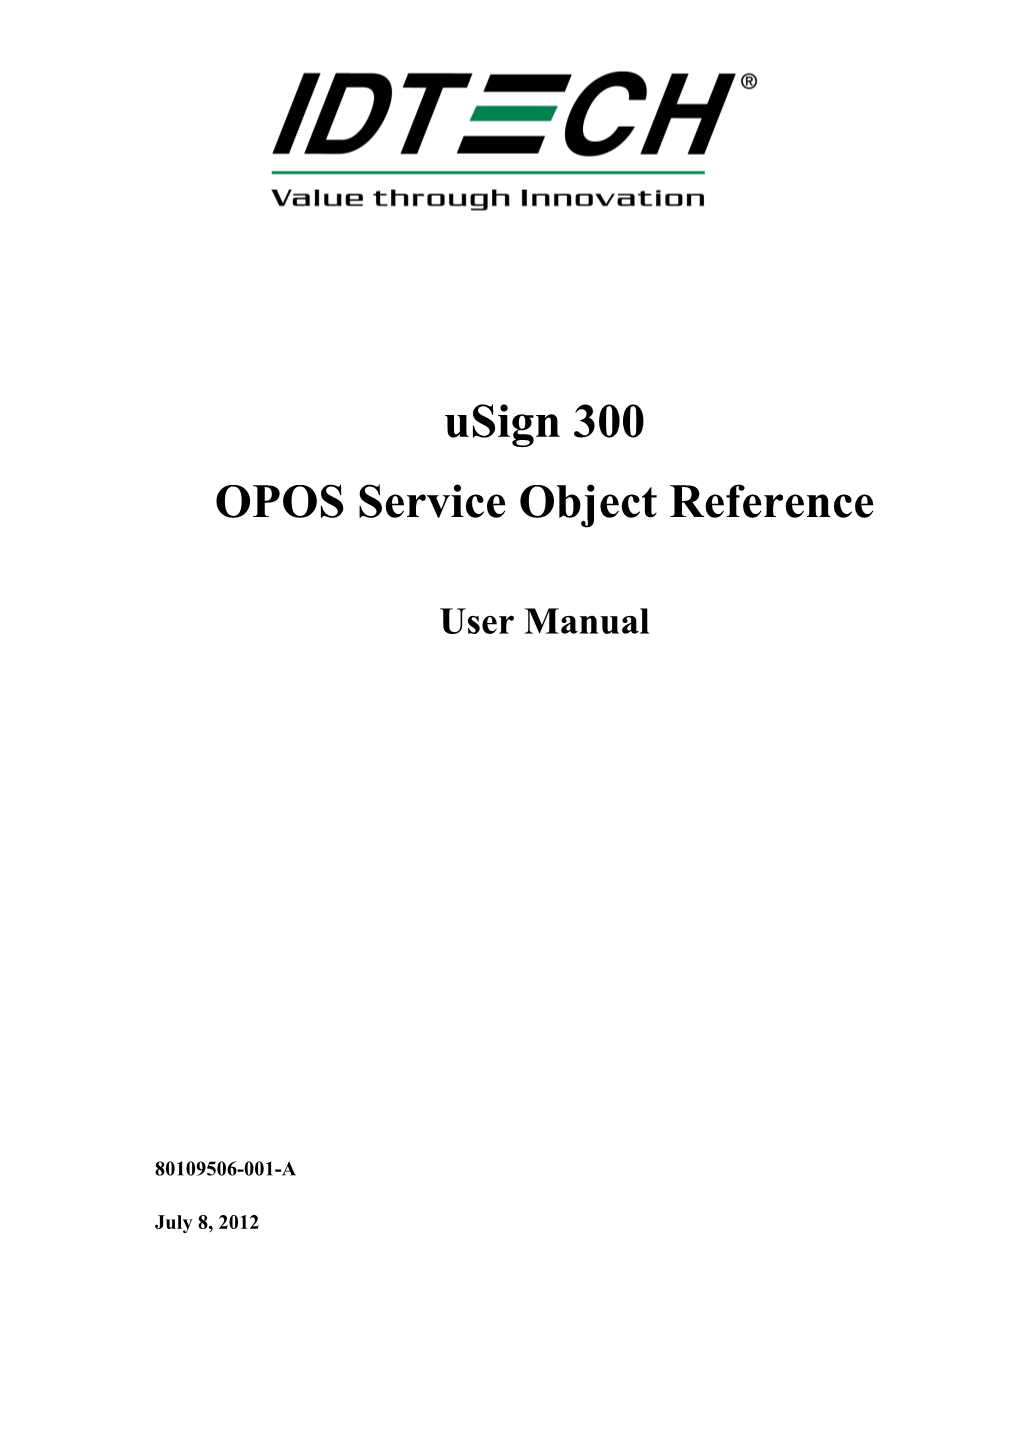 Usign 300 OPOS Service Object Reference